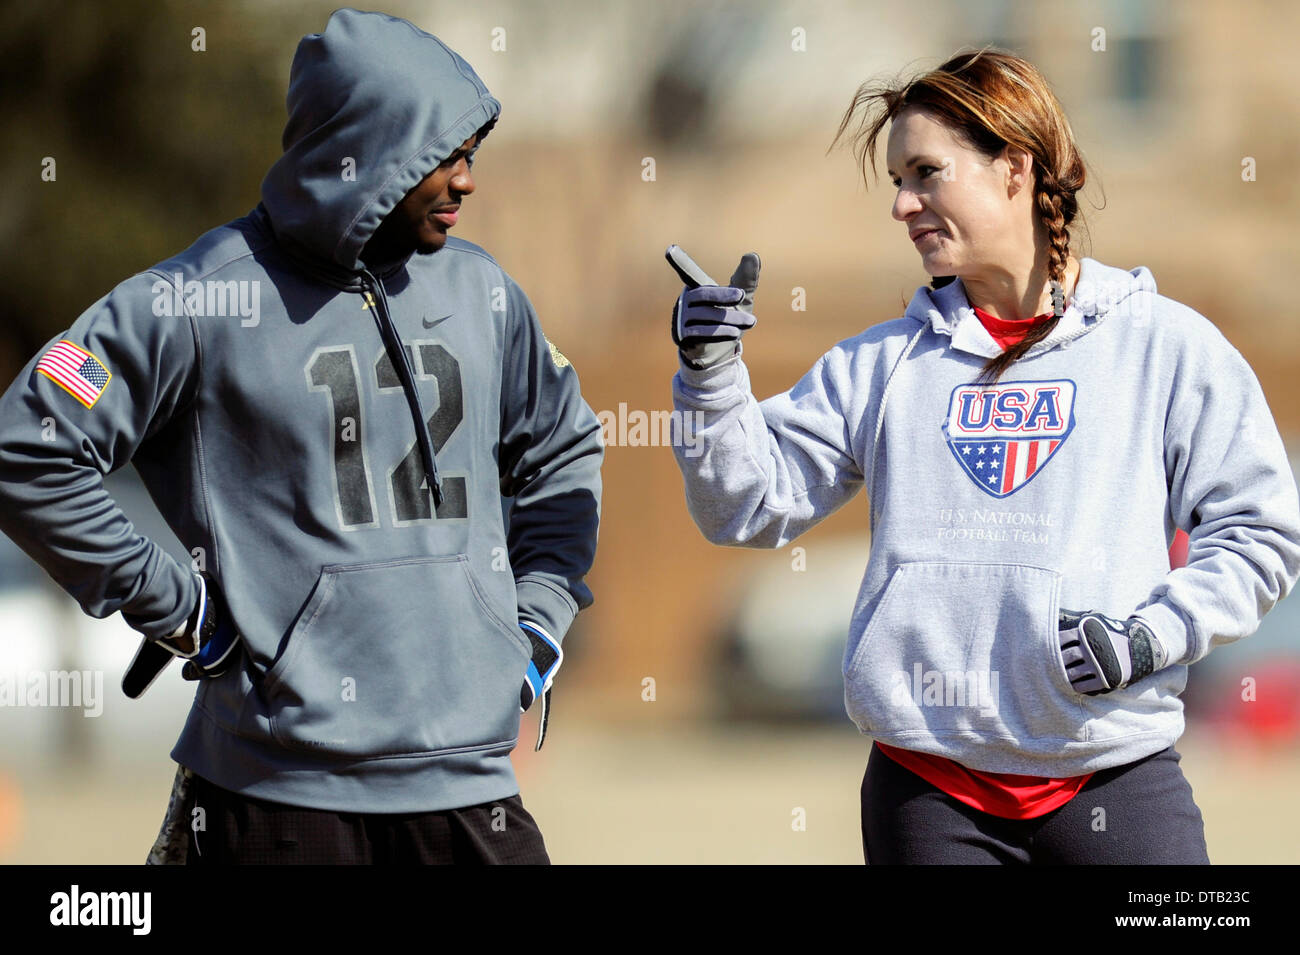 Feb. 13, 2014 - Allen, TX, United States of America - Jennifer Welter (right) visits with a teammate while waiting to participate in a drill during practice Thursday, February 13, 2014, in Allen, Texas. The 5-foot-2-inch, 130 pound Welter is the first woman to try out for a professional football team at a position other than kicker, she is trying to make the Texas Revolution of the Arena Football League, as a running back. Stock Photo